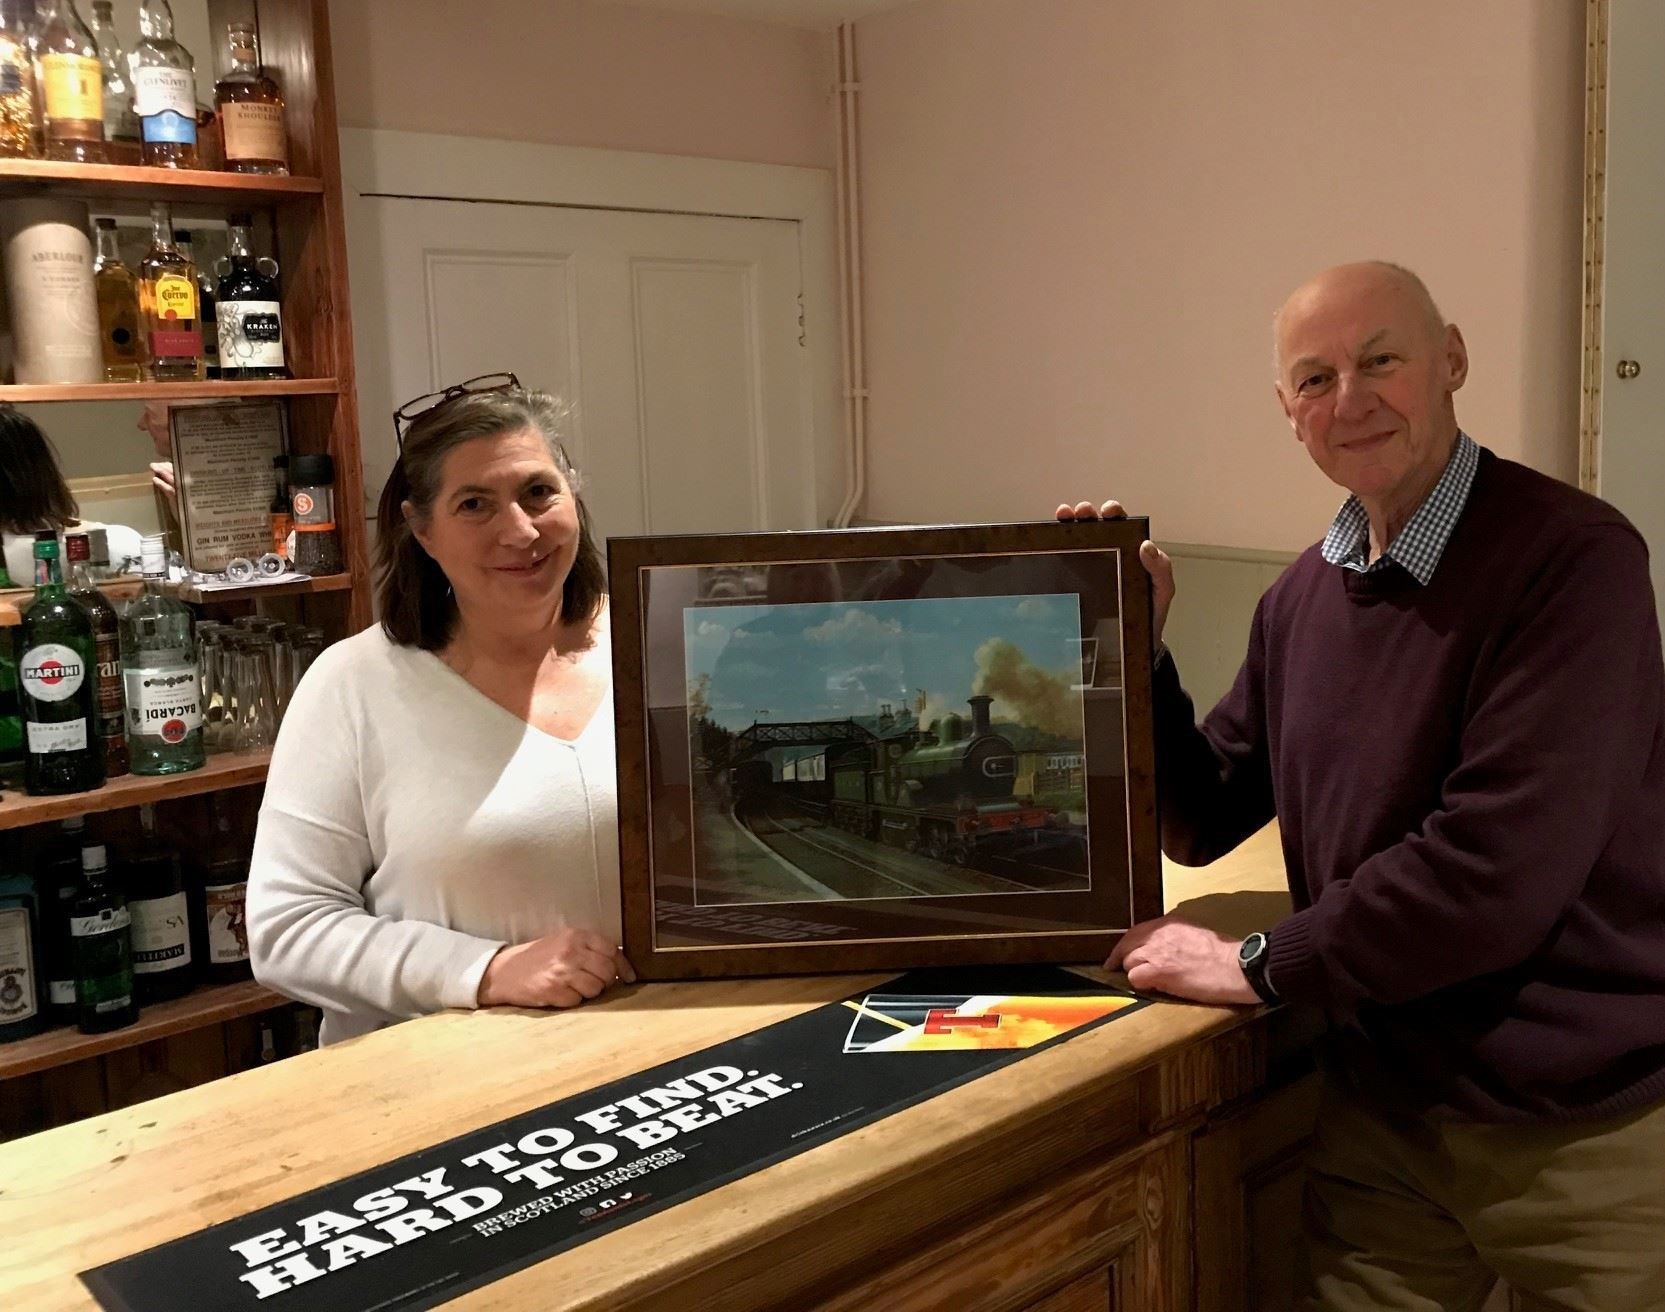 John Diffey, from the Great North of Scotland Railway Association, presents the Craigellachie Station print to Alison Hunter, new owner of the Fiddichside Inn.